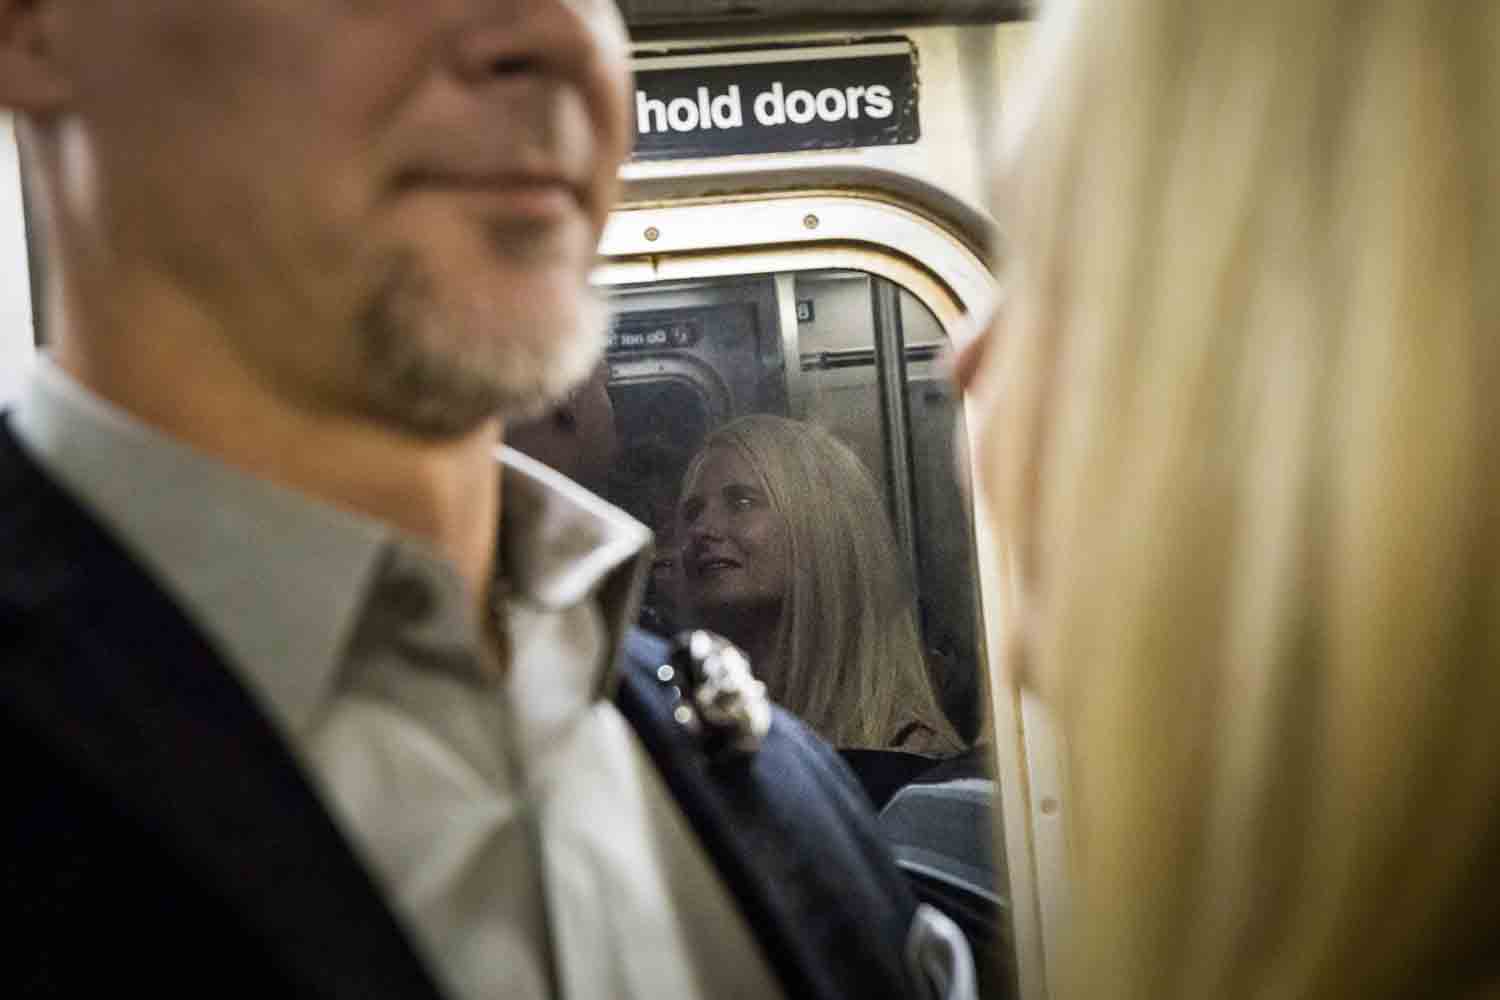 Reflection of woman in window of subway car